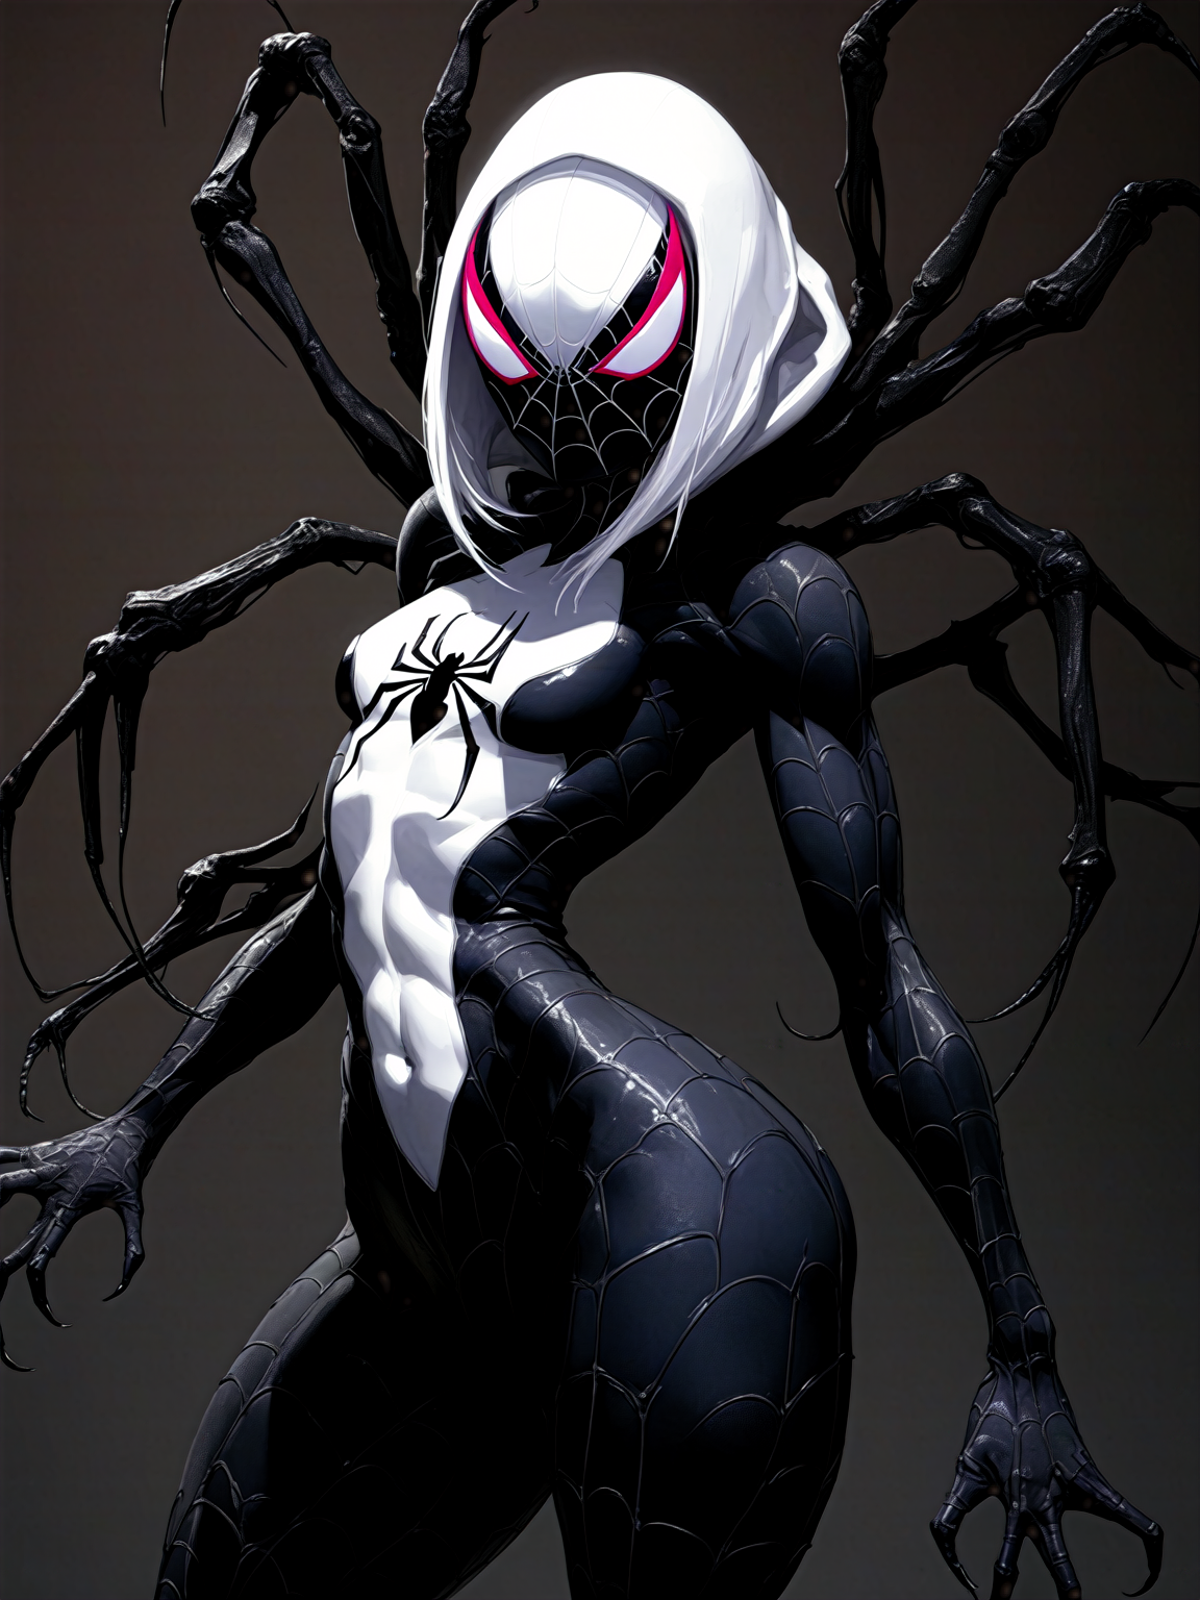 A Black and White Spider-Woman Artwork with Spiky Hair.